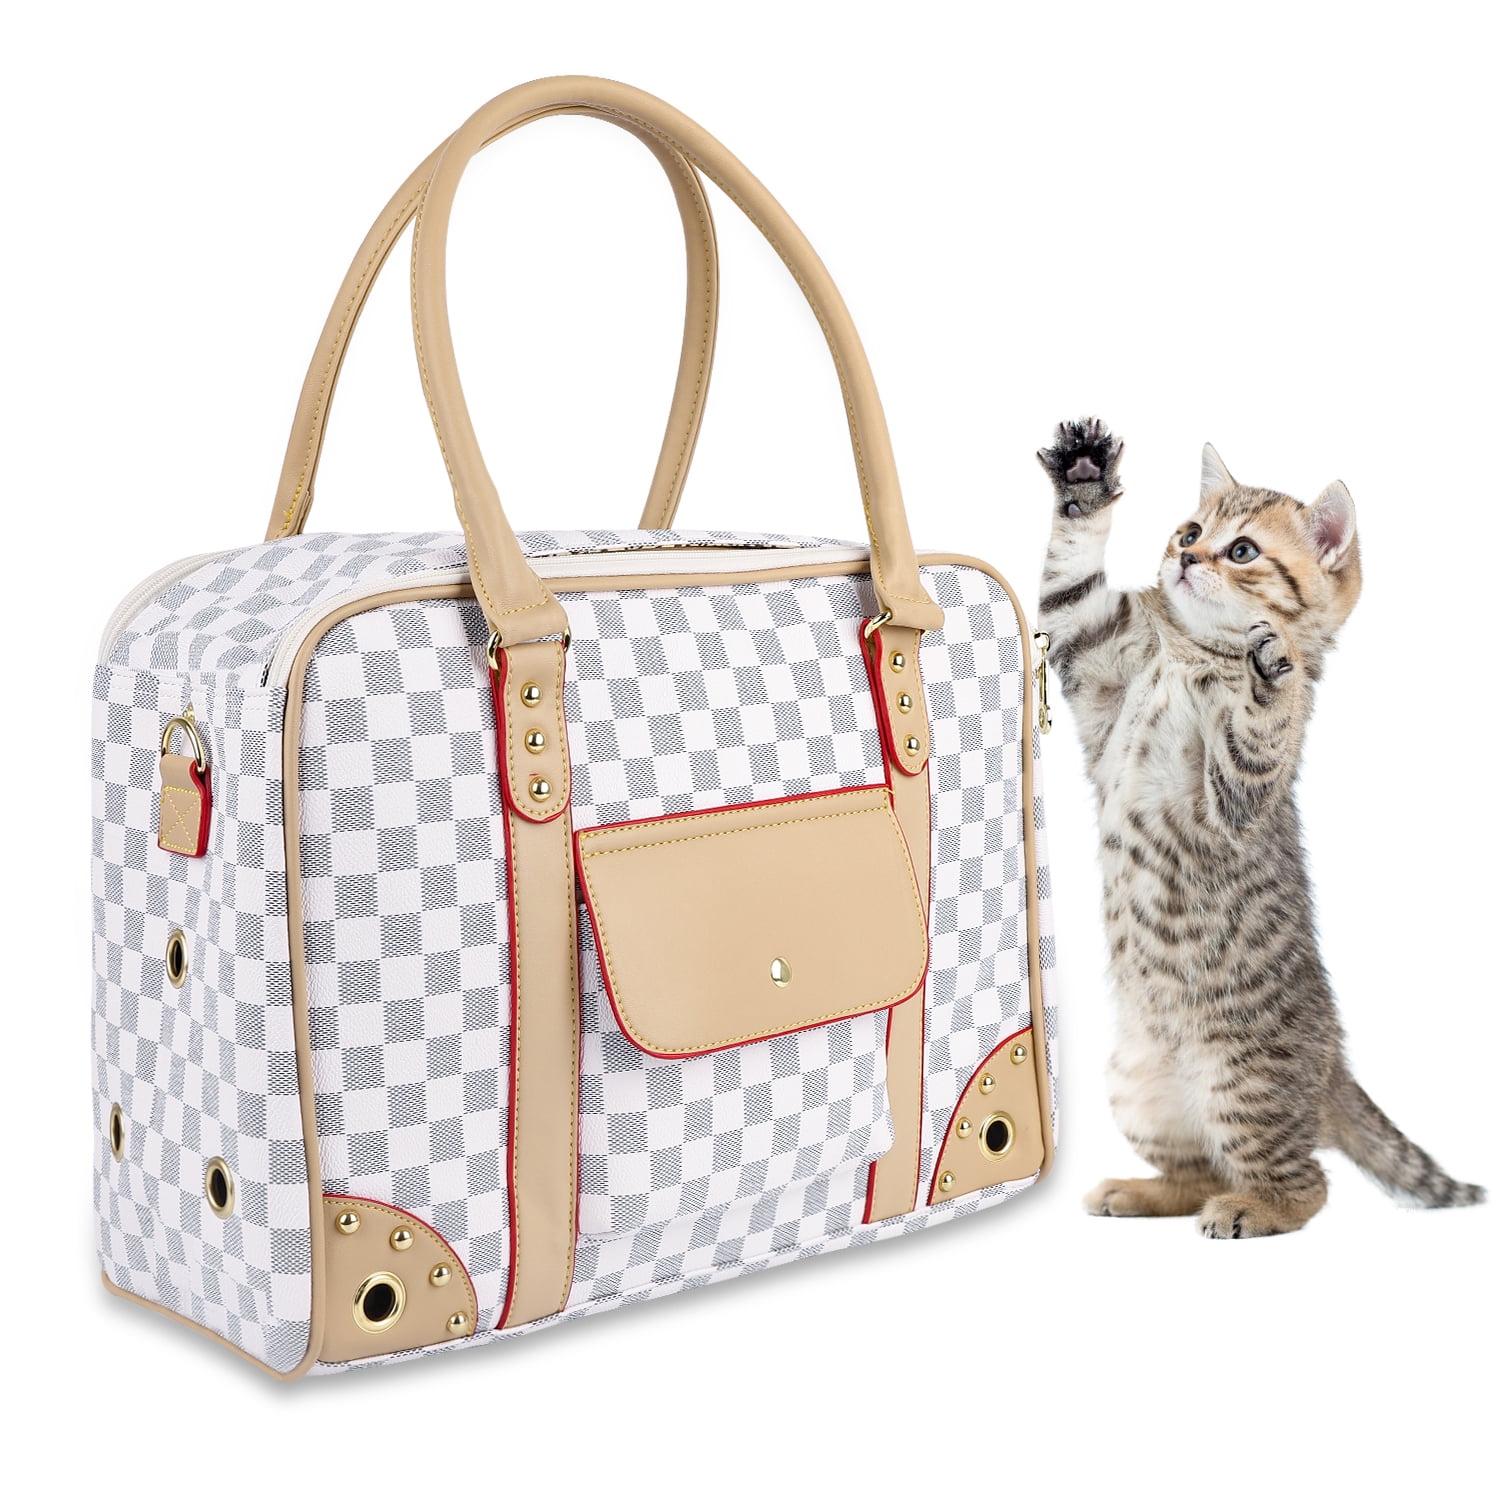 xuyidan Fashion Pet Carrier Dog Purse Foldable Dog Cat Handbag Leather Tote  Bag Soft-Sided Carriering for Puppy and Small Dogs Portable Travel  Airline-Approved, (White, L) 